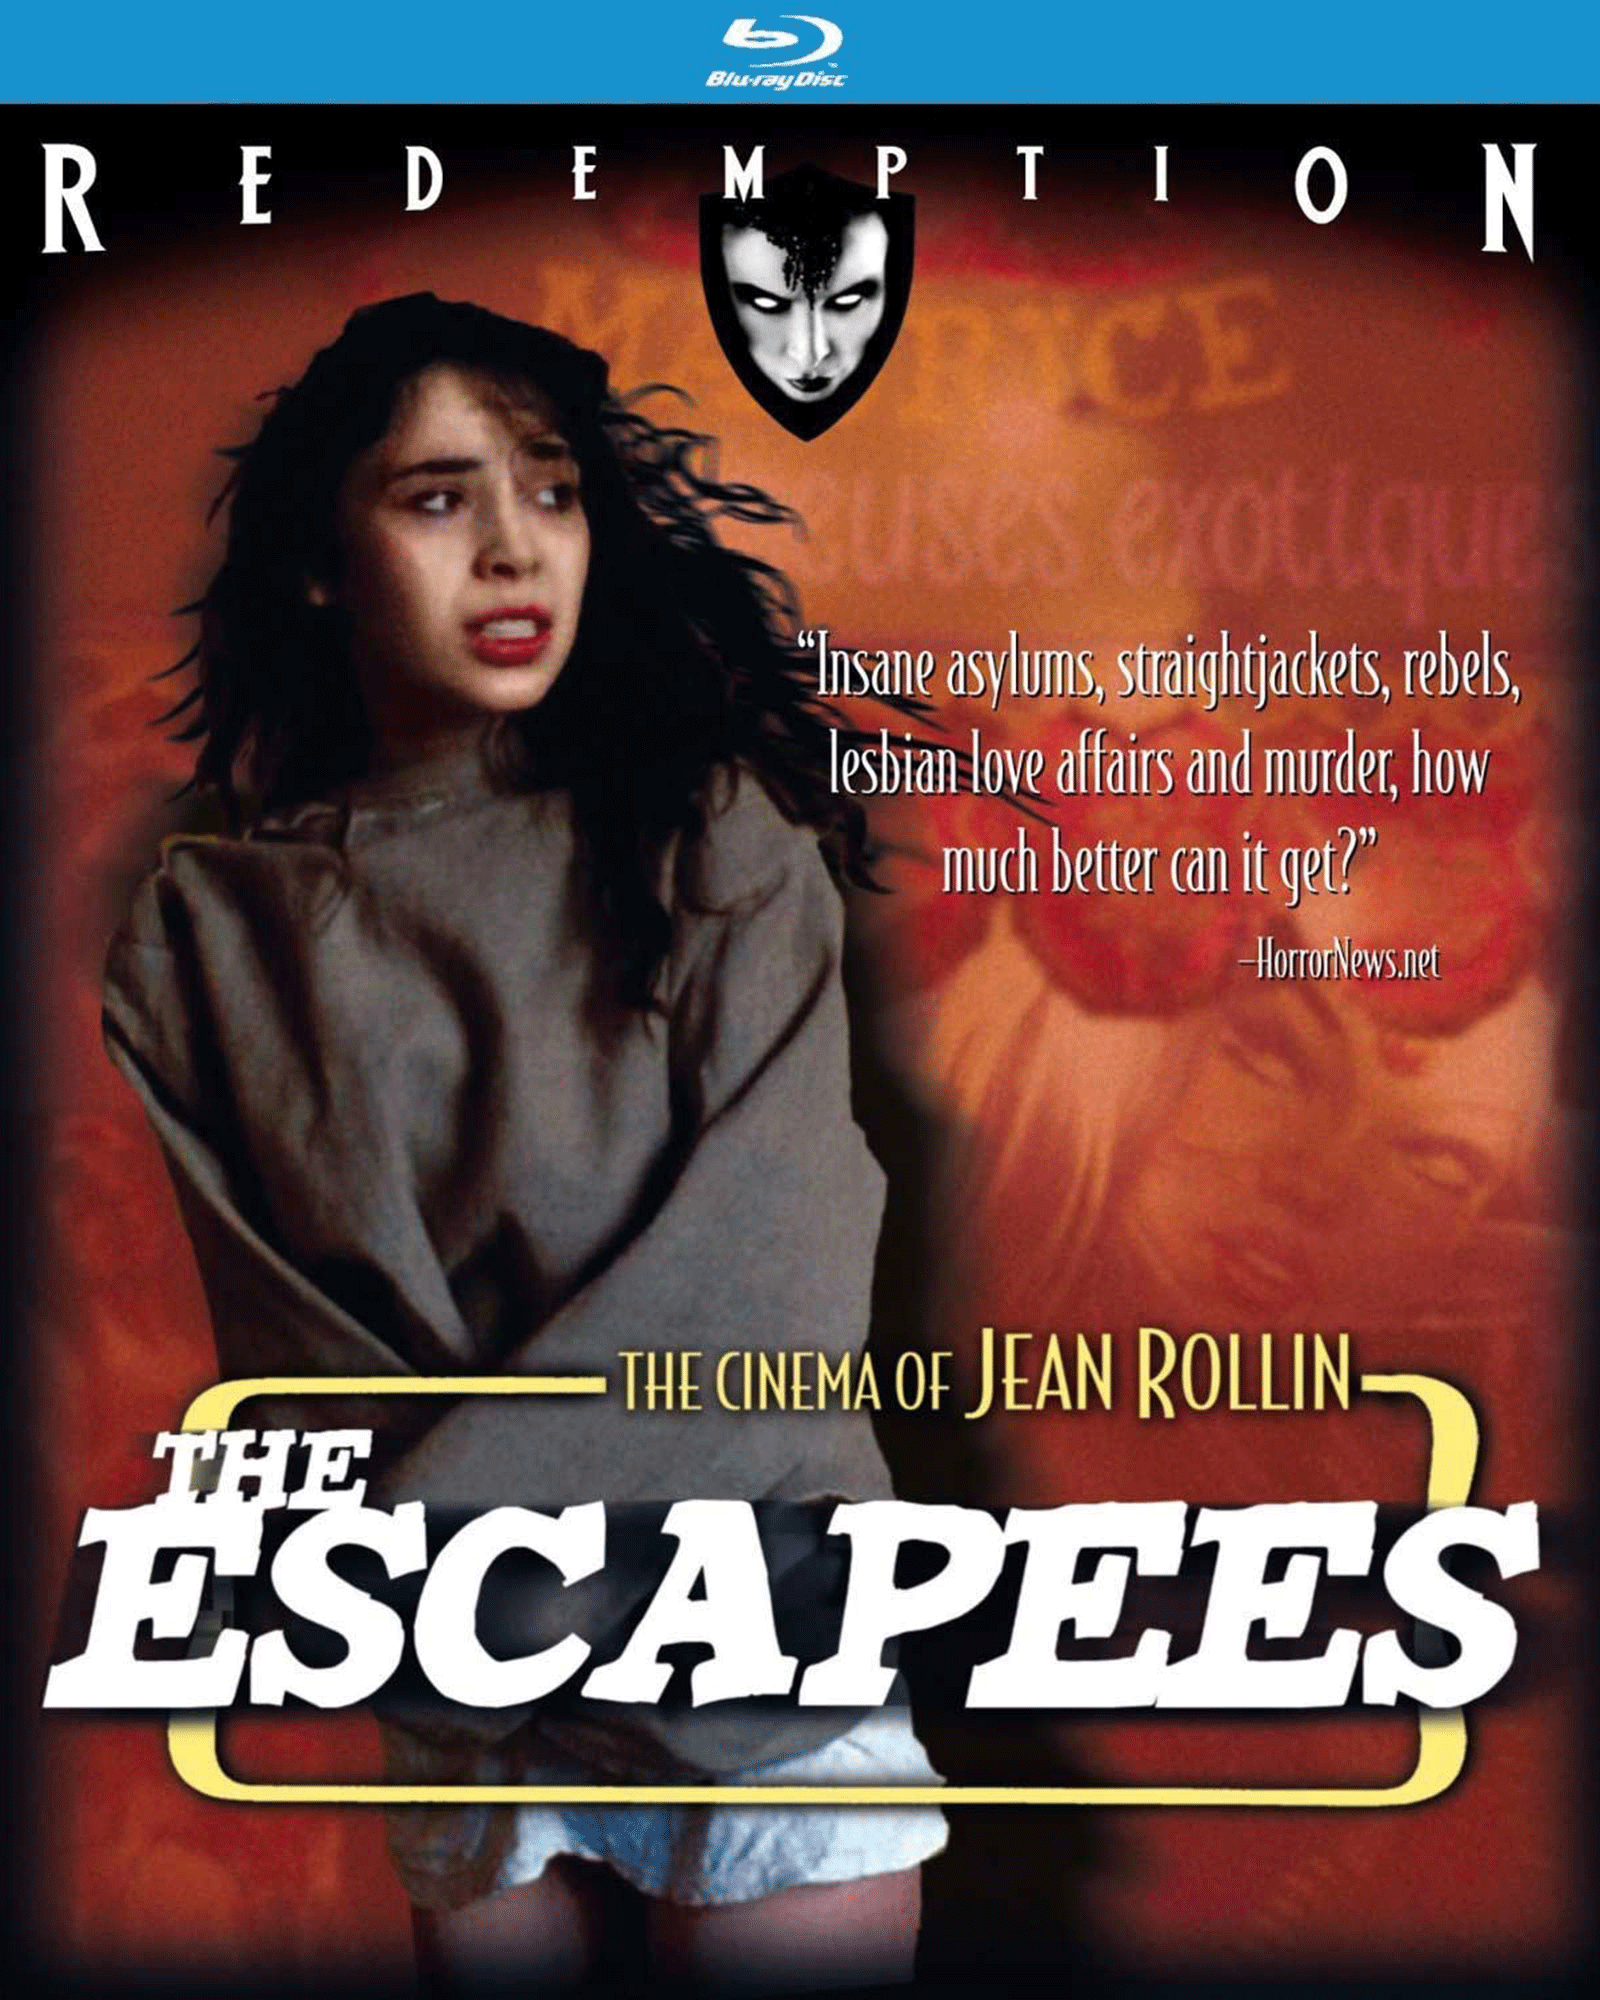 THE ESCAPEES - BLU-RAY